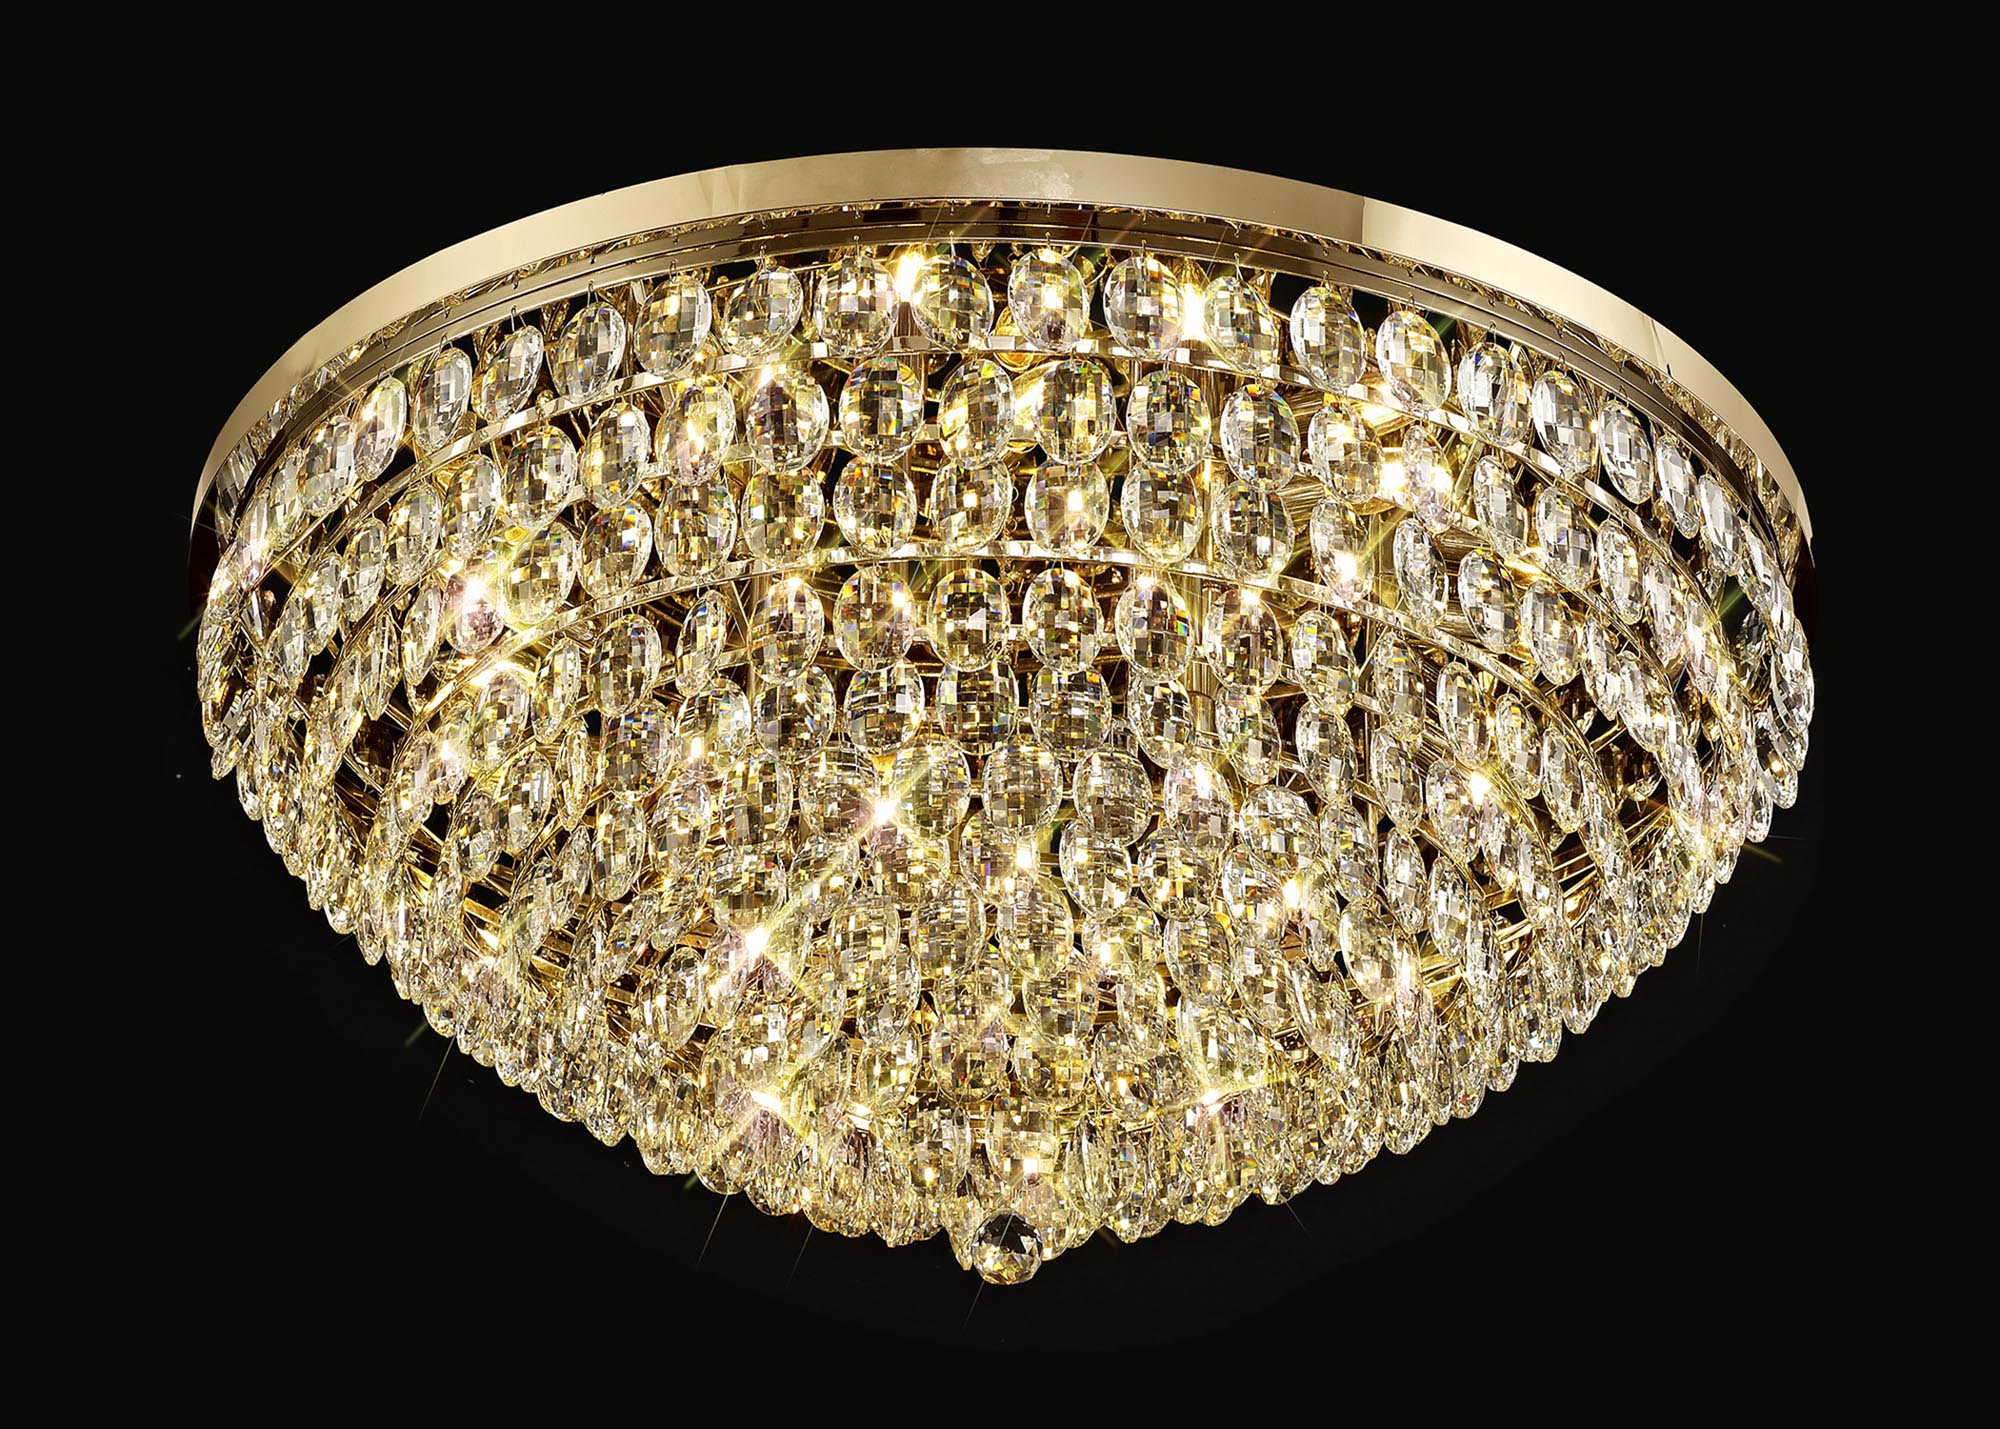 Coniston French Gold Crystal Ceiling Lights Diyas Flush Crystal Fittings